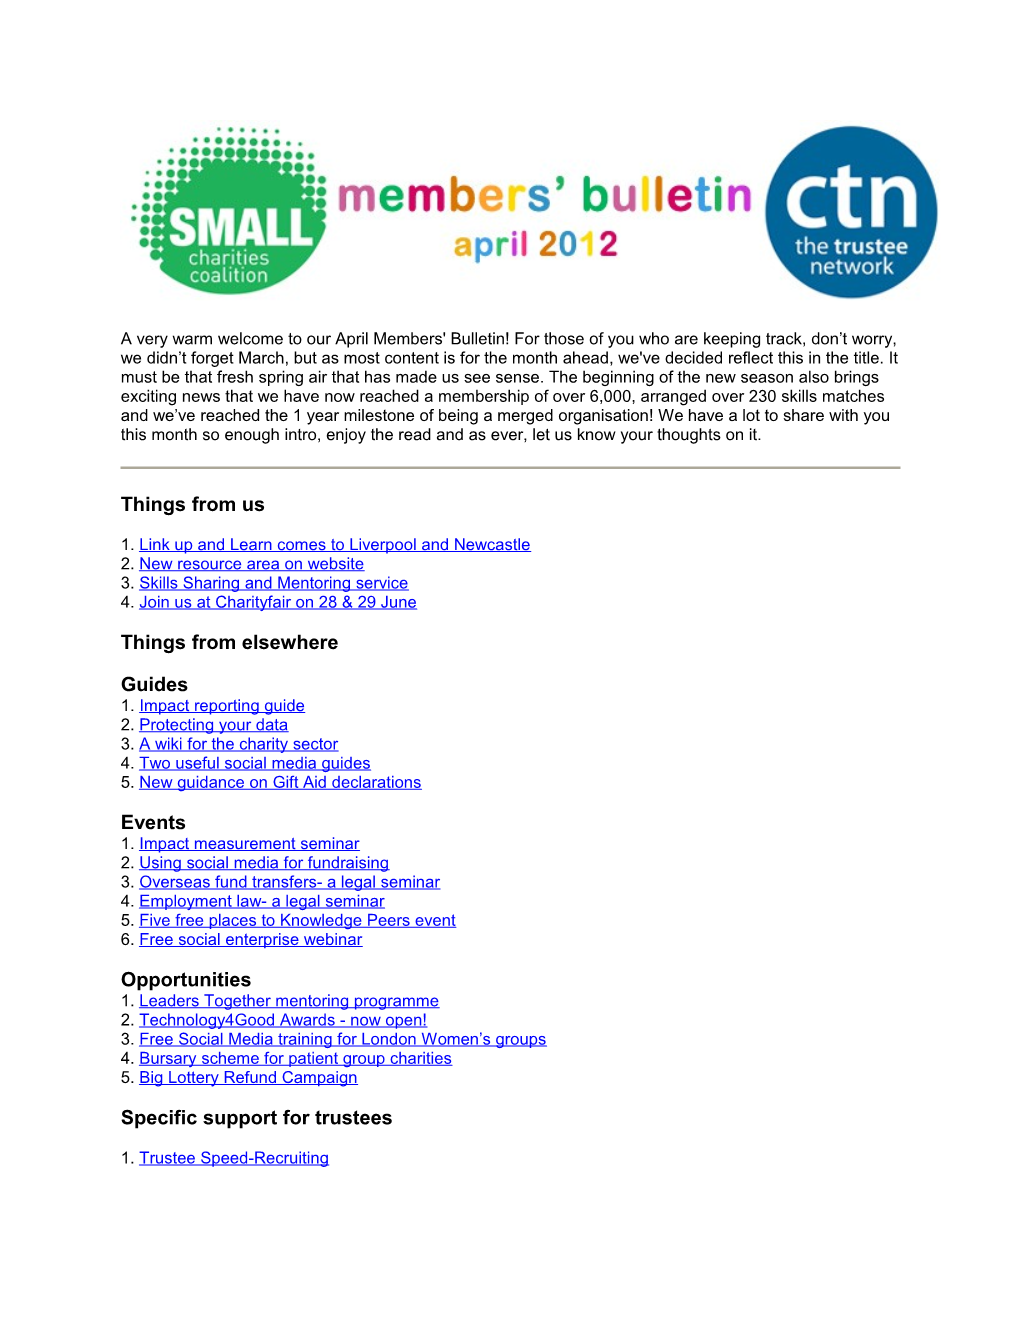 A Very Warm Welcome to Our April Members' Bulletin! for Those of You Who Are Keeping Track